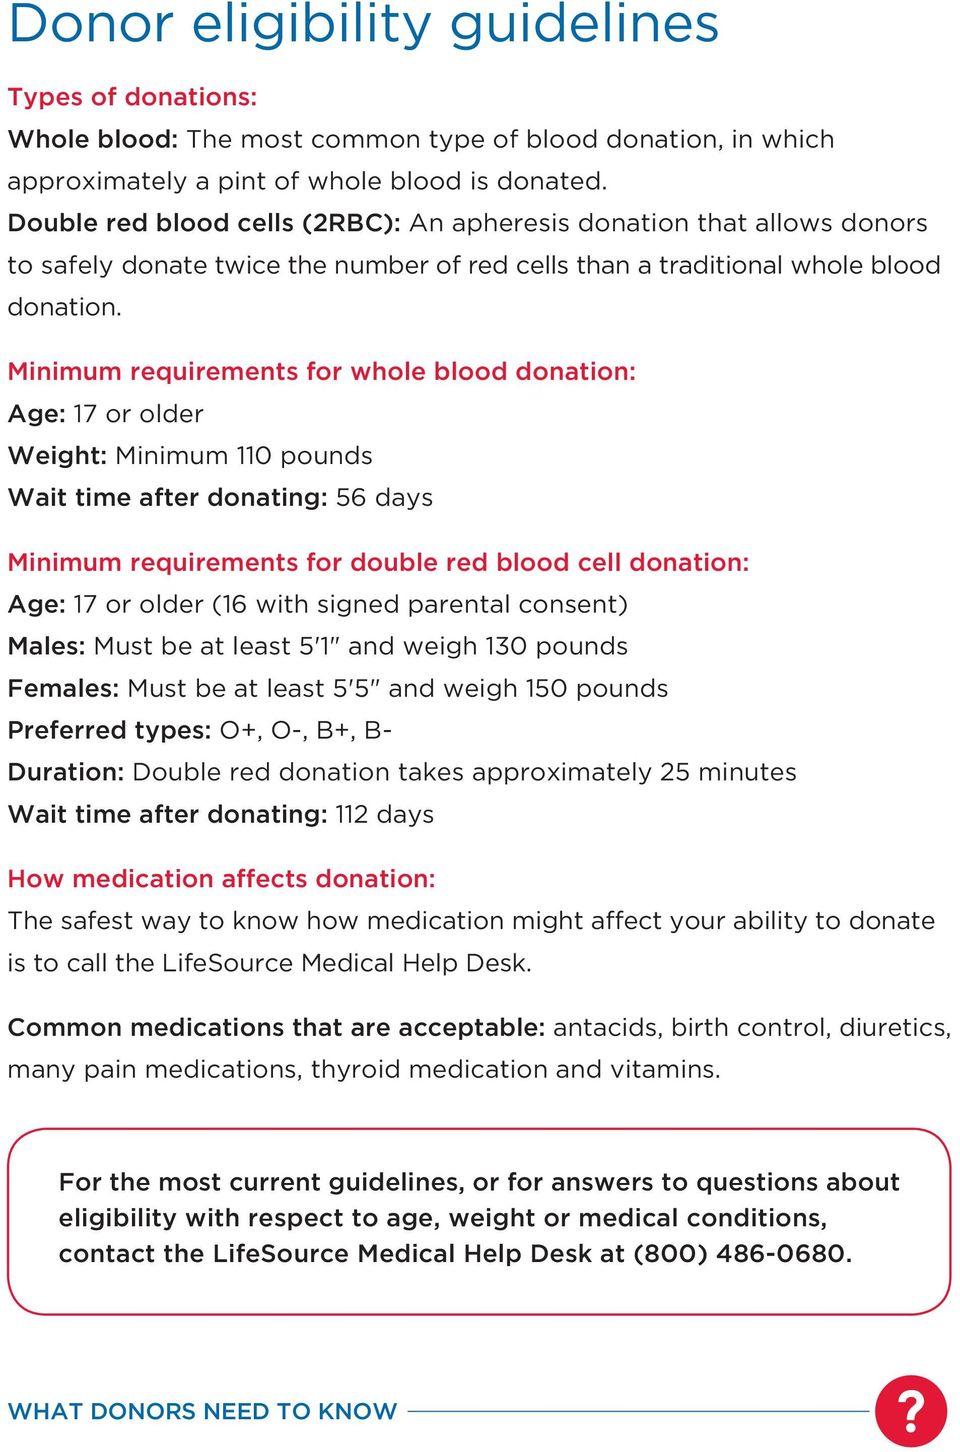 Minimum requirements for whole blood donation: Age: 17 or older Weight: Minimum 110 pounds Wait time after donating: 56 days Minimum requirements for double red blood cell donation: Age: 17 or older